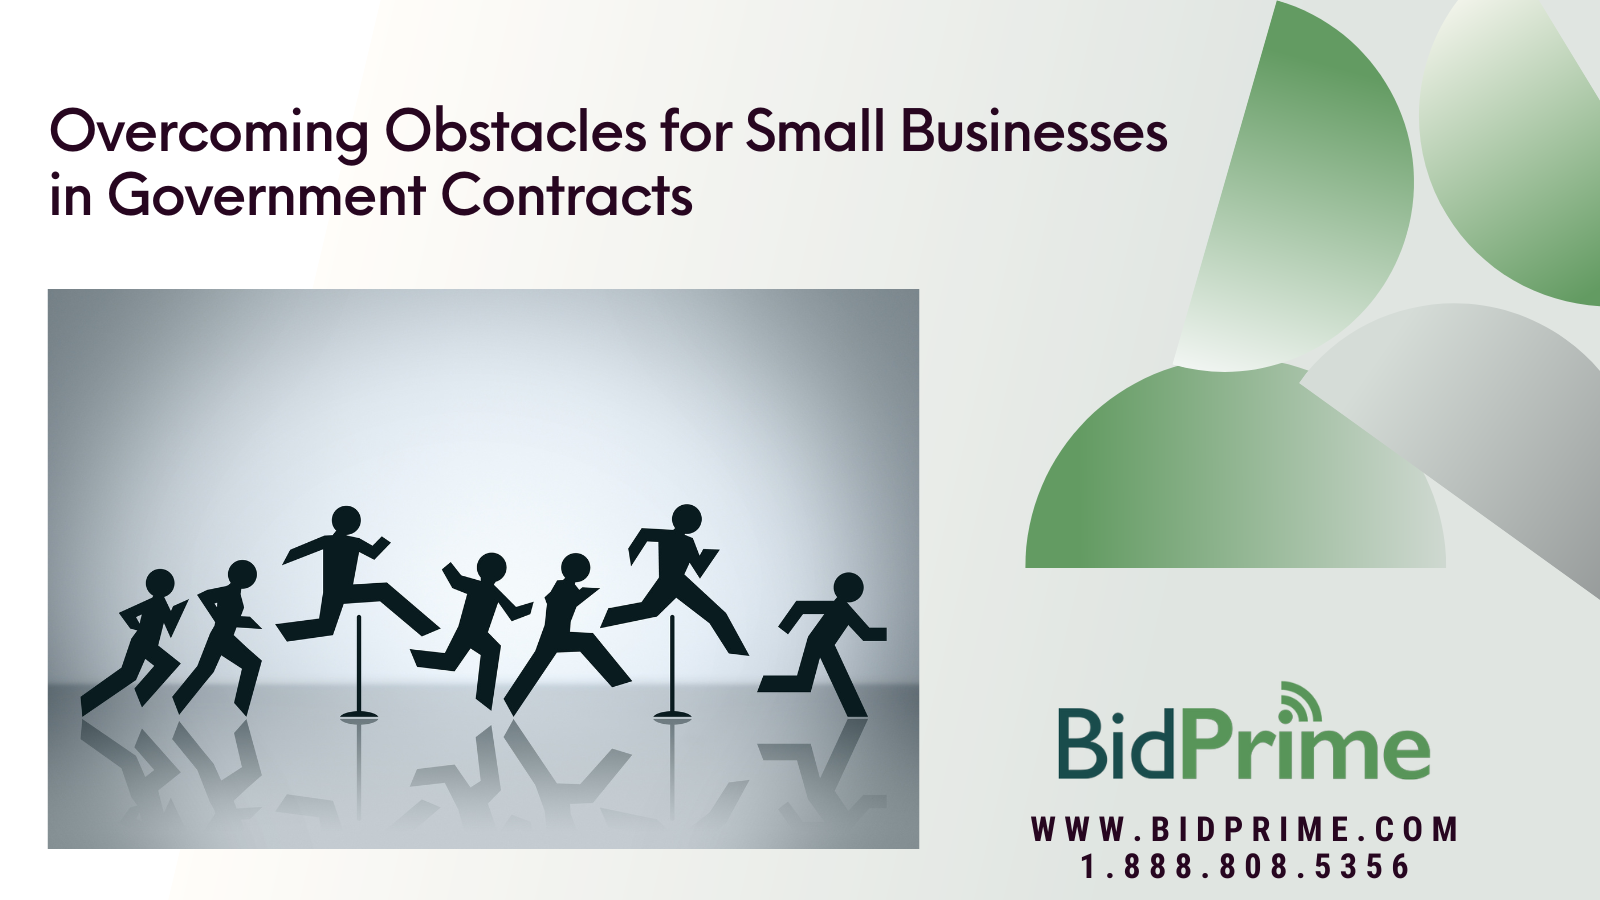 Overcoming Obstacles for Small Businesses in Government Contracts